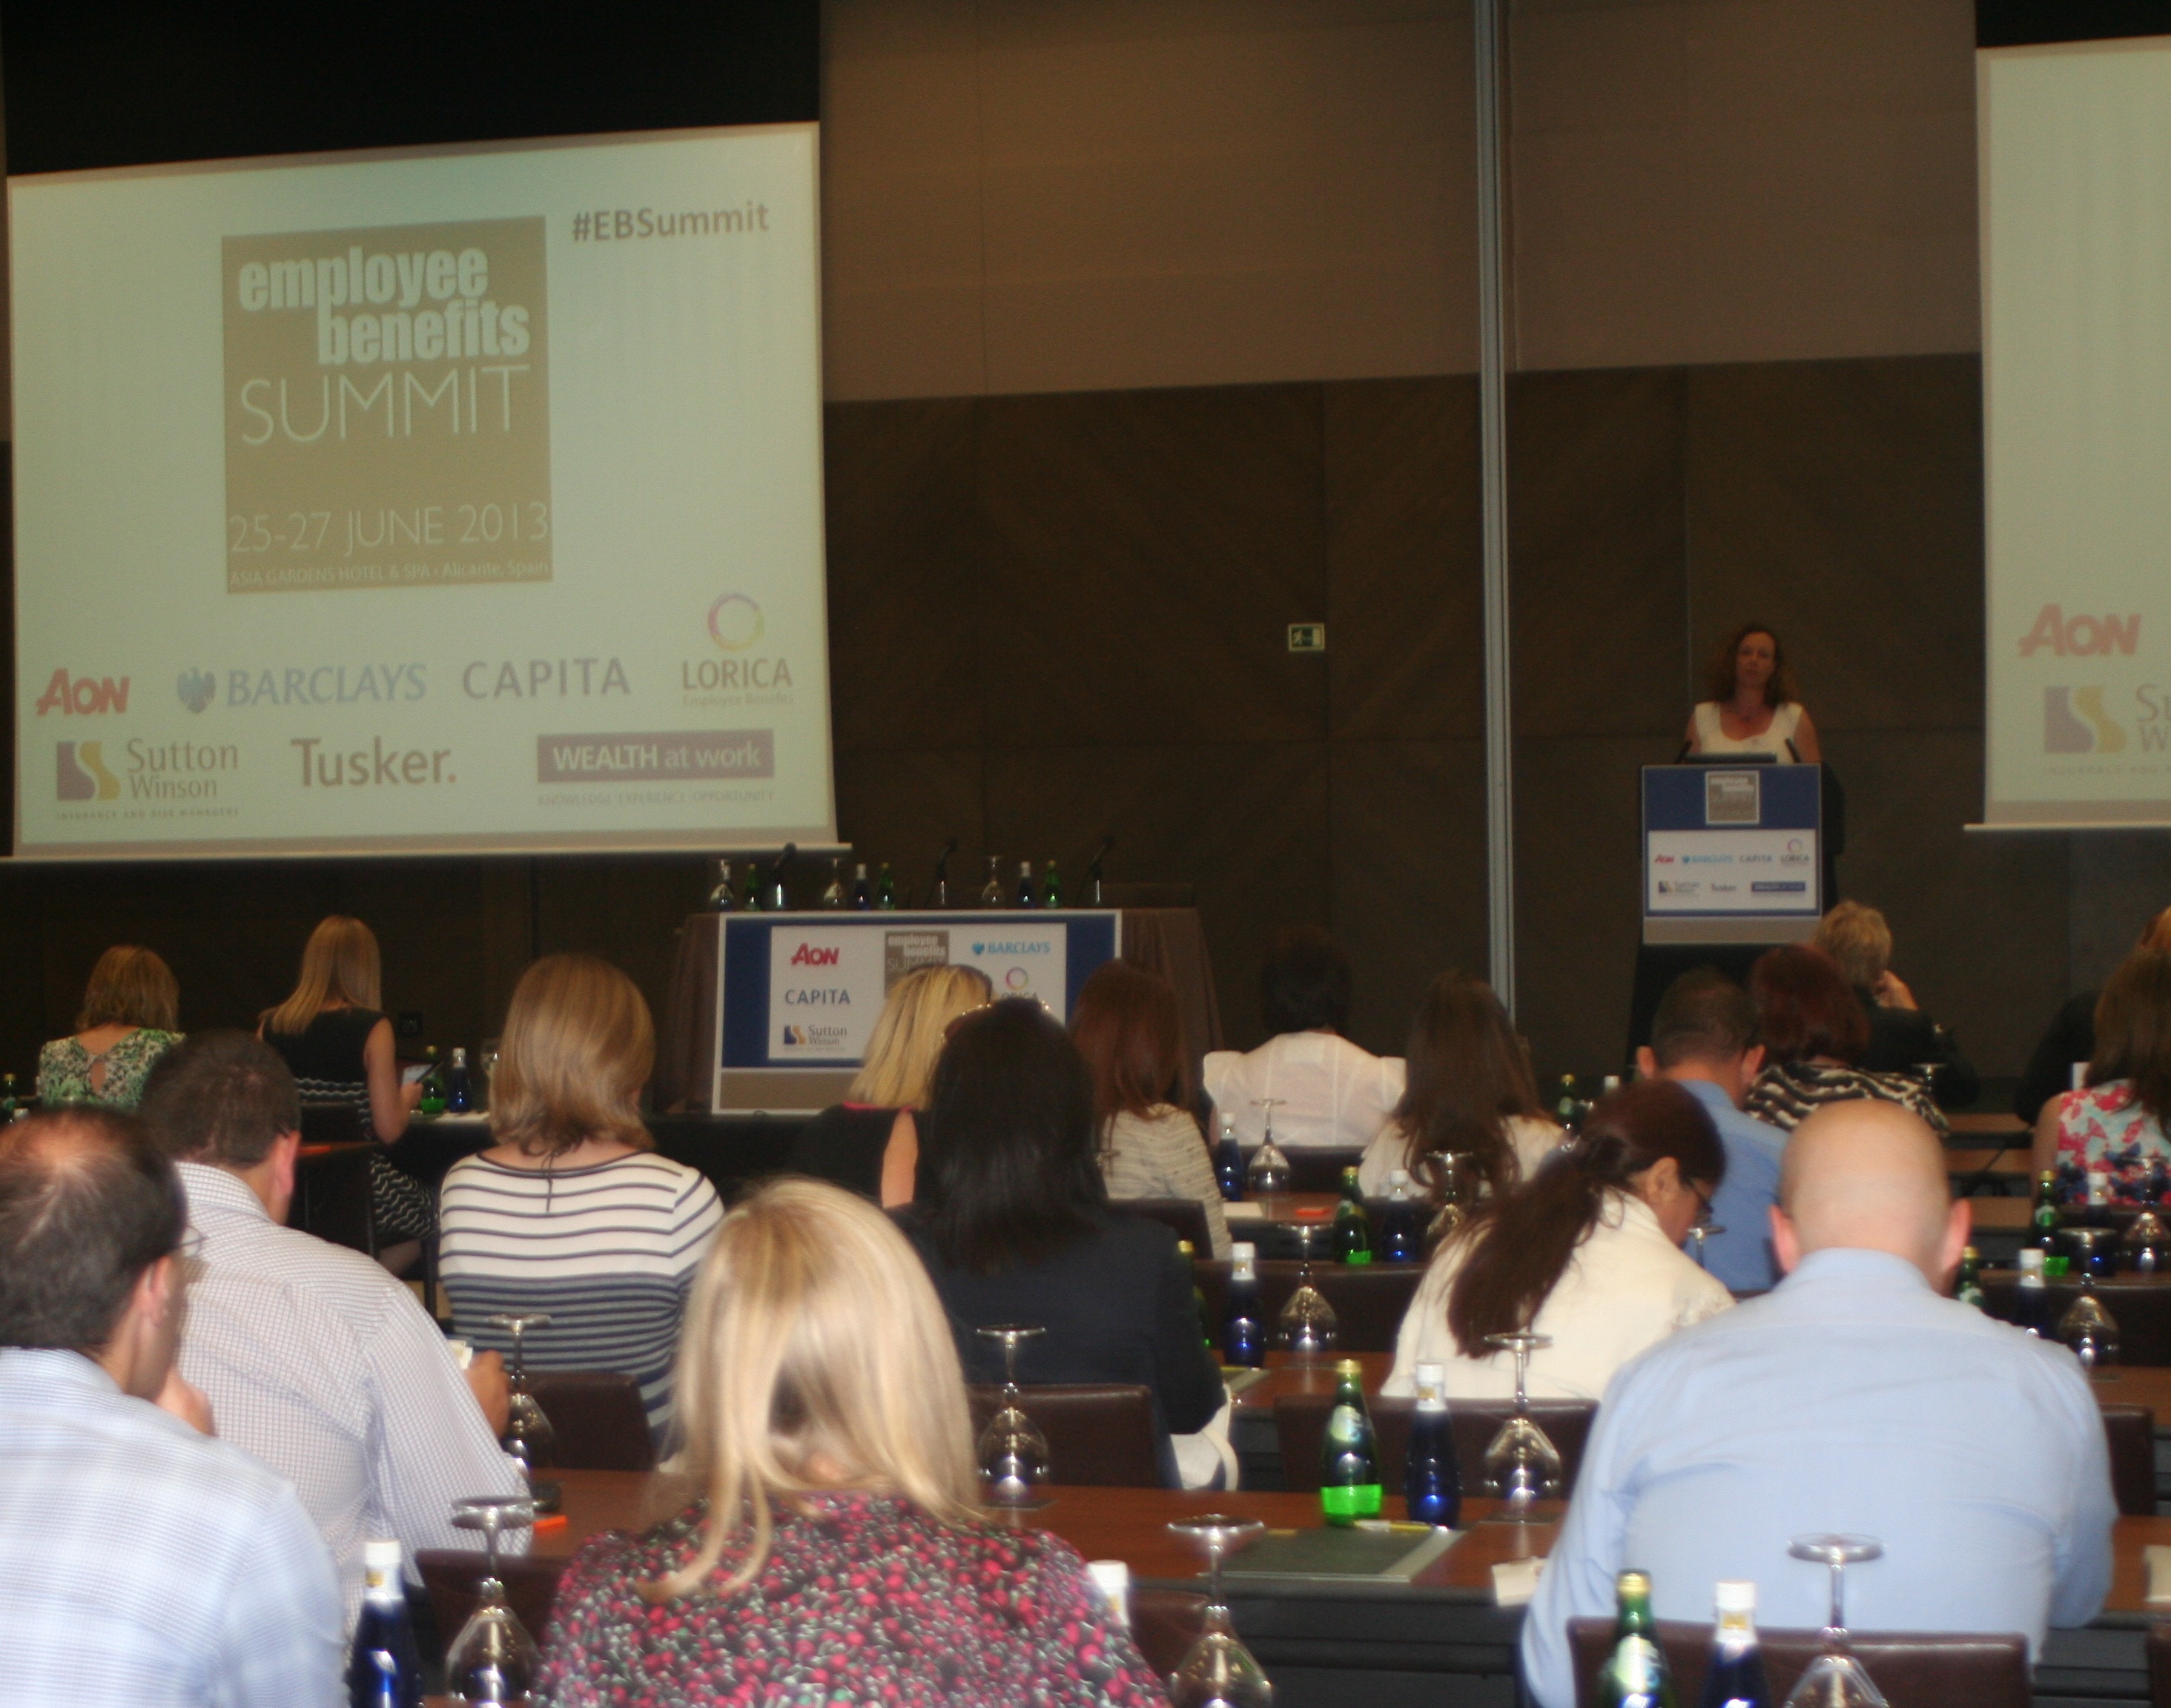 Employee-Benefits-Summit-2013-conference